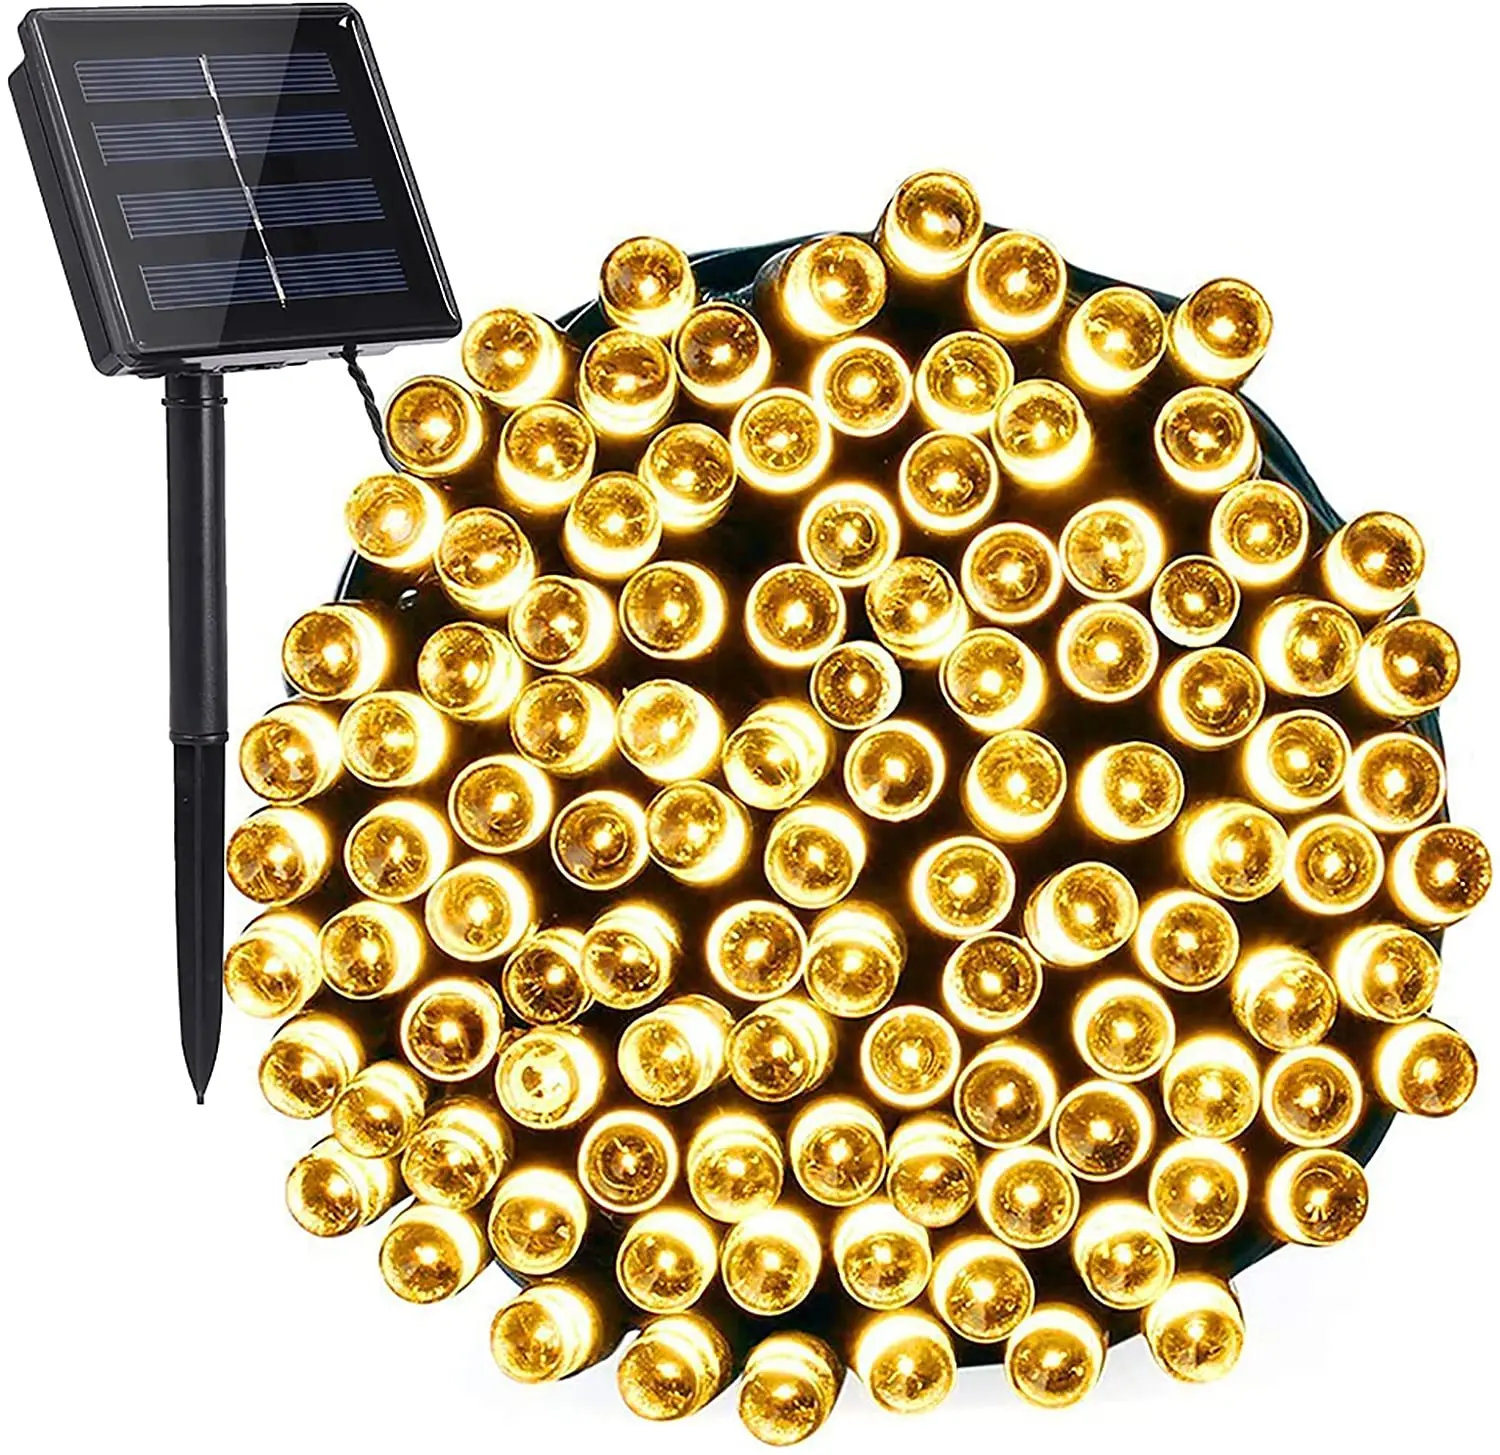 Led Solar String Lights Outdoor Waterproof Solar Light 8Modes Fairy Lights for Garden Patio Yard Party Decoration